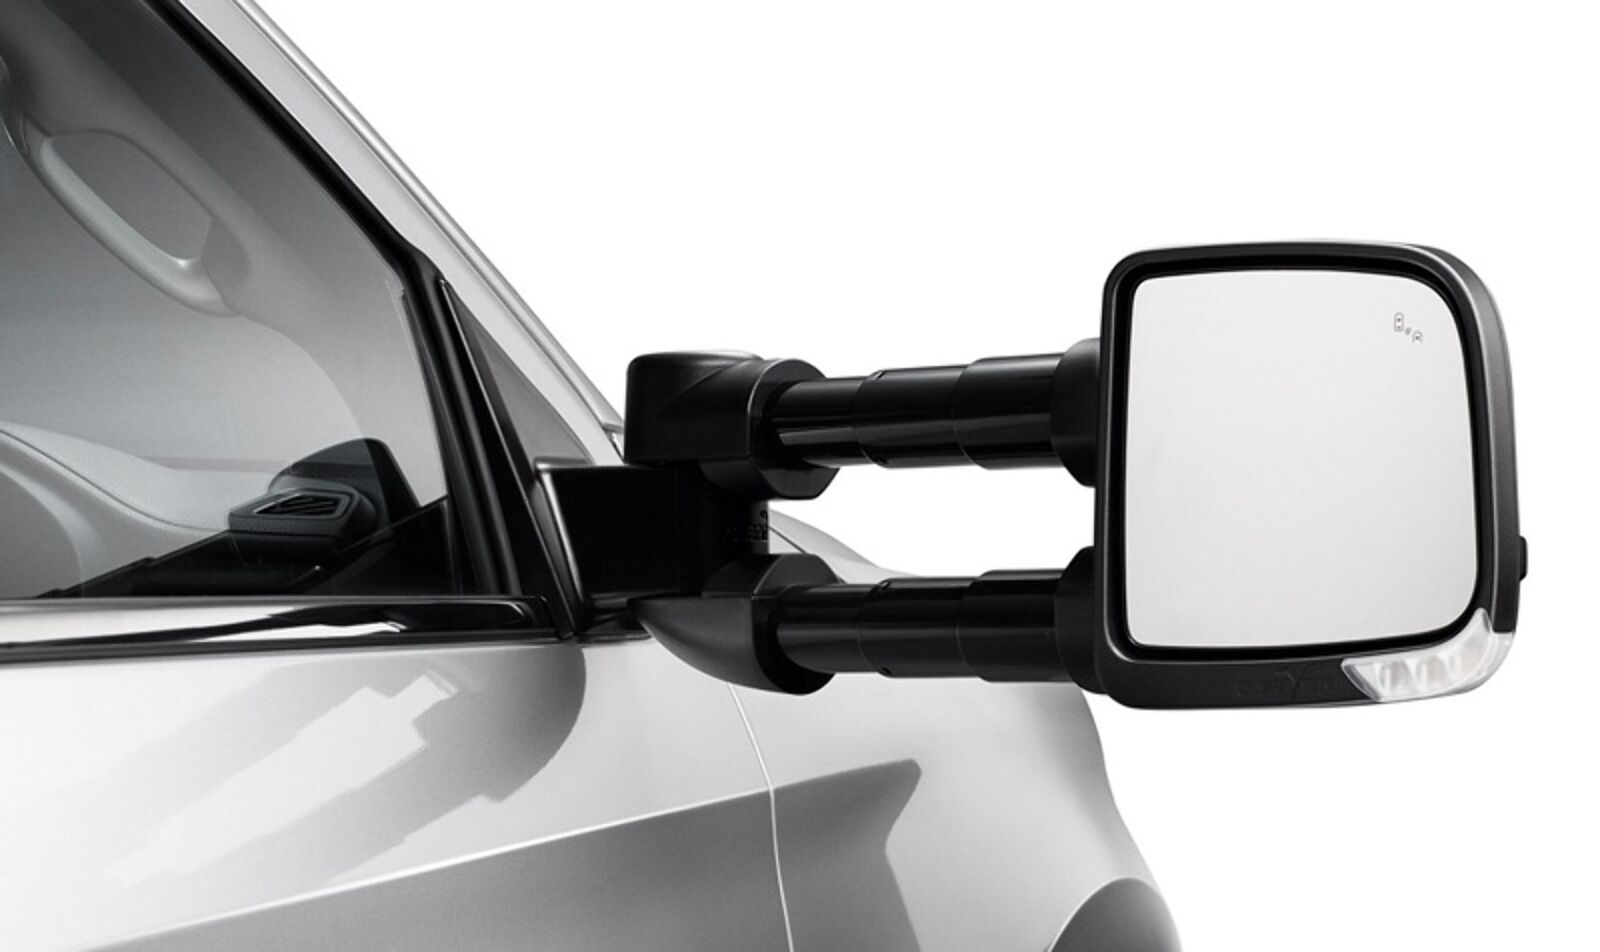 Holden Colorado 7 (2012-2016) Clearview Towing Mirrors